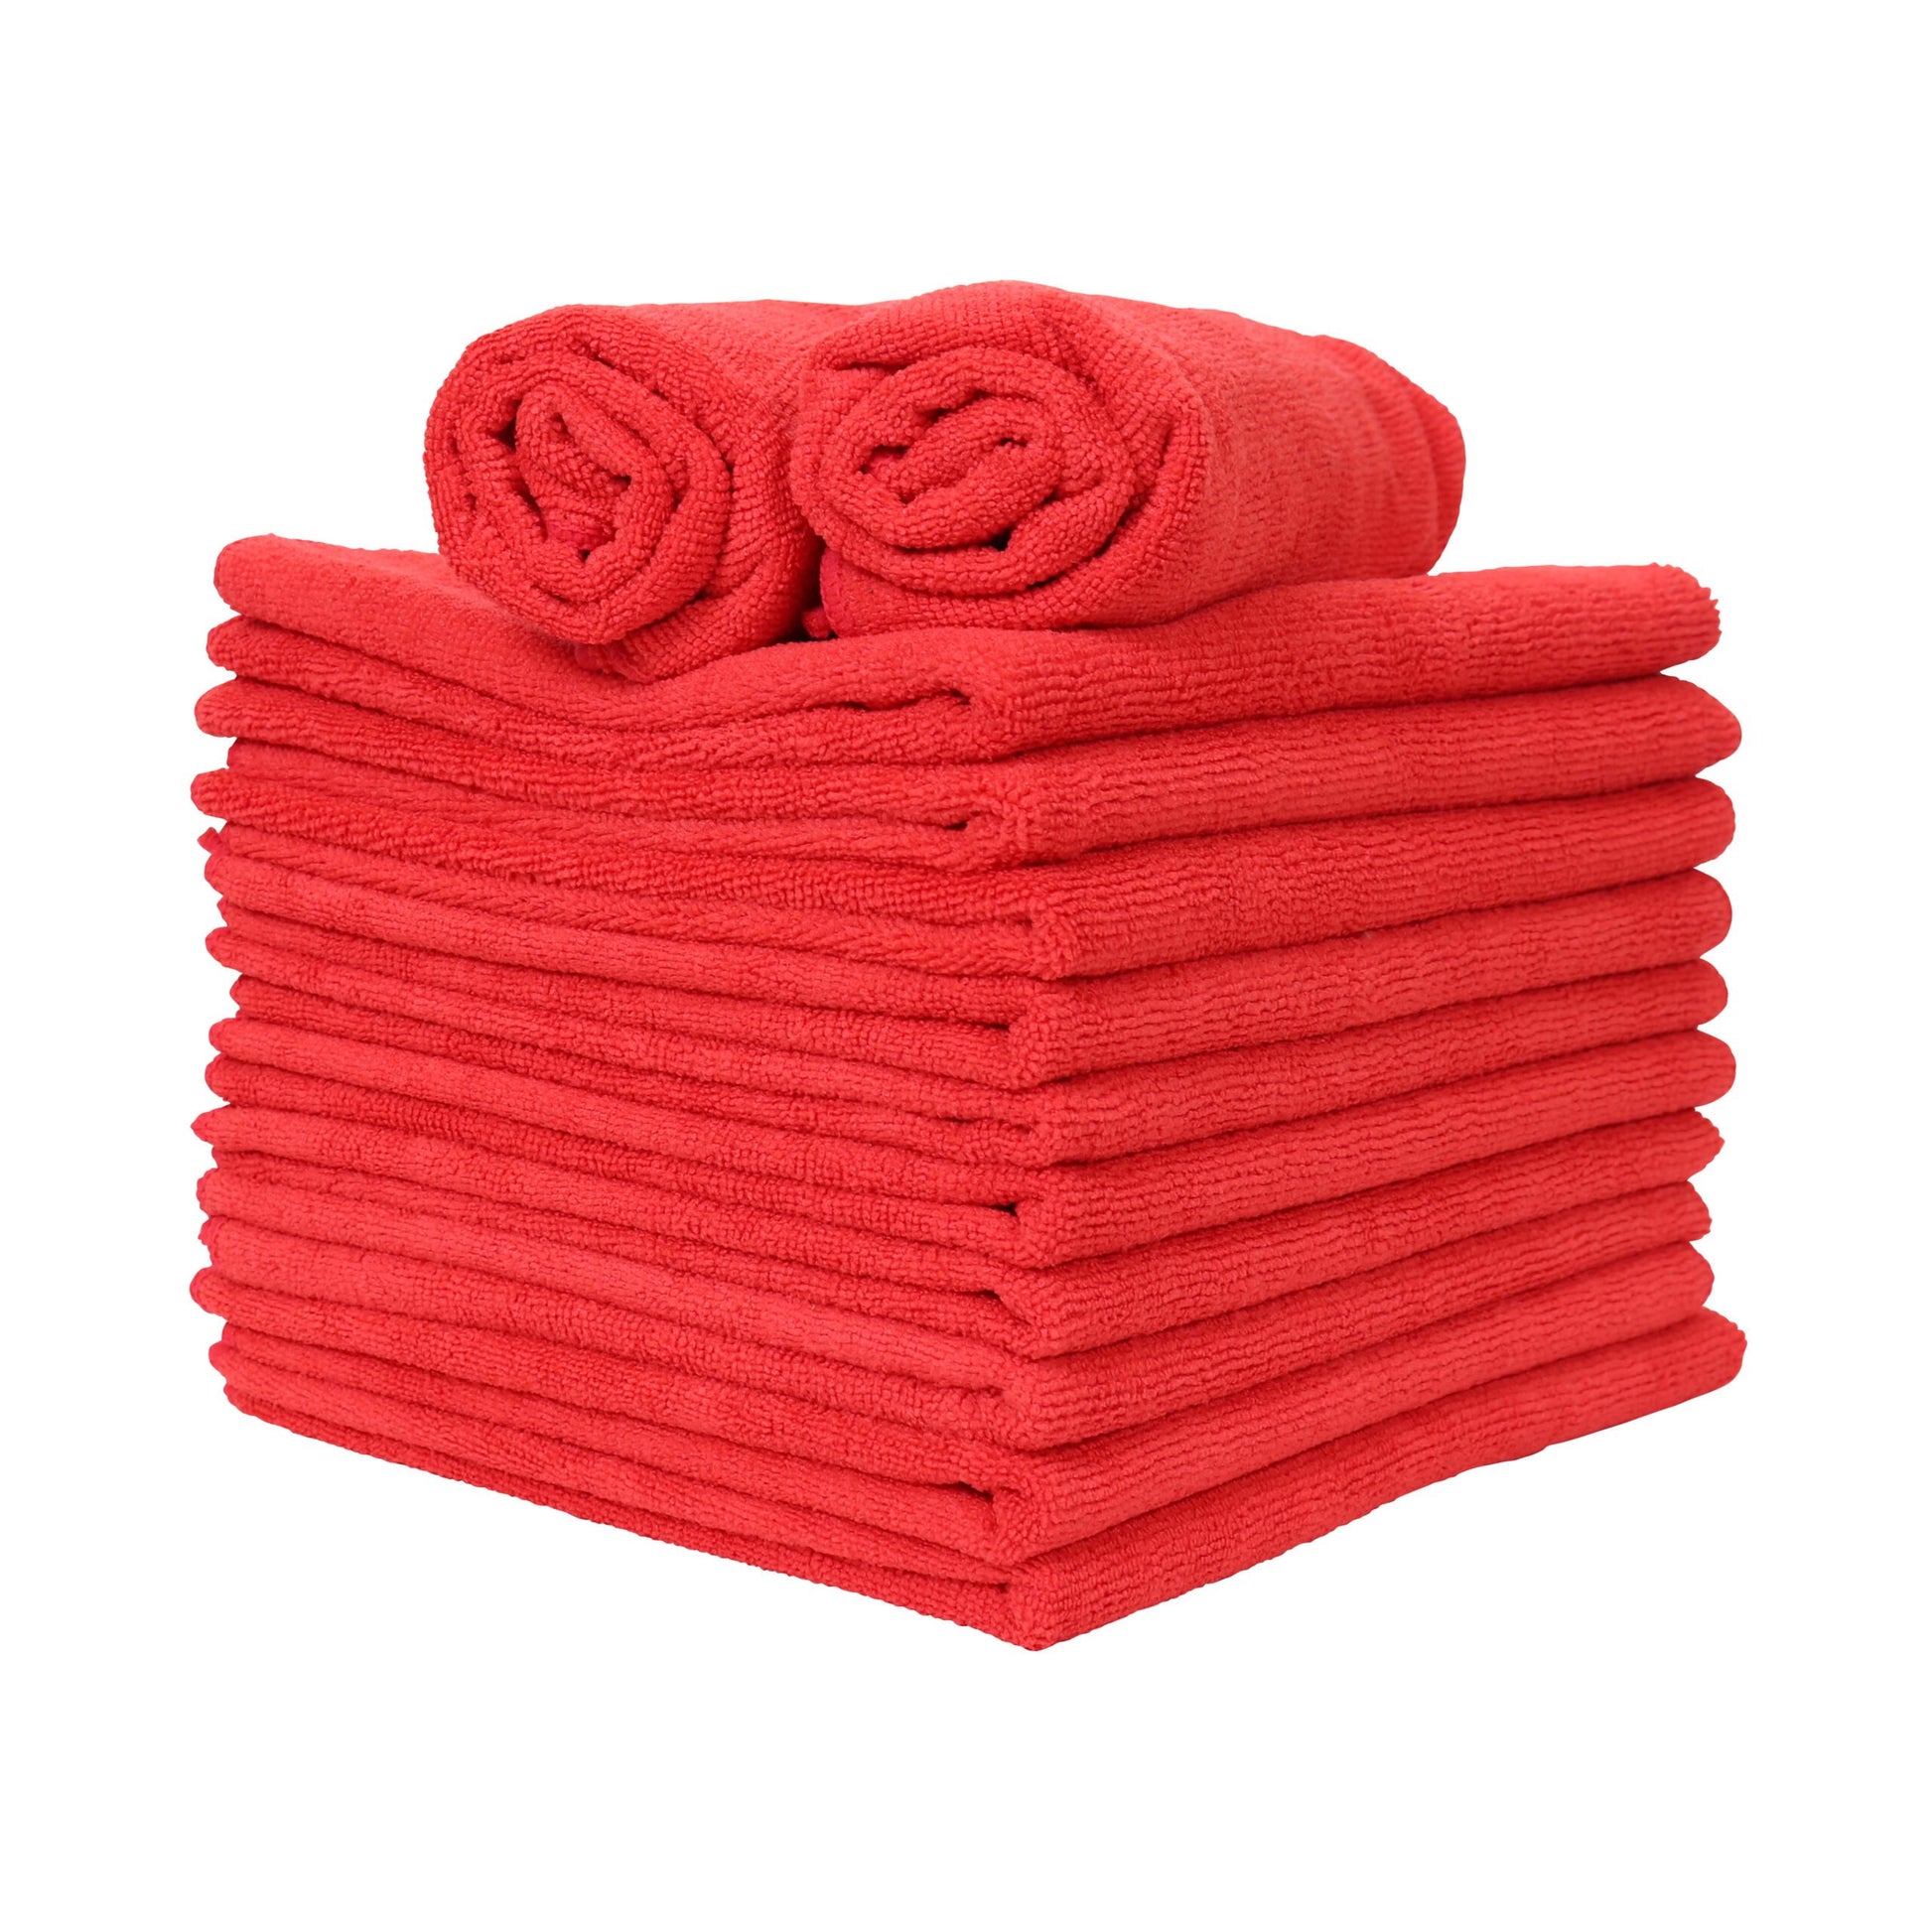 a stack of red microfiber towels